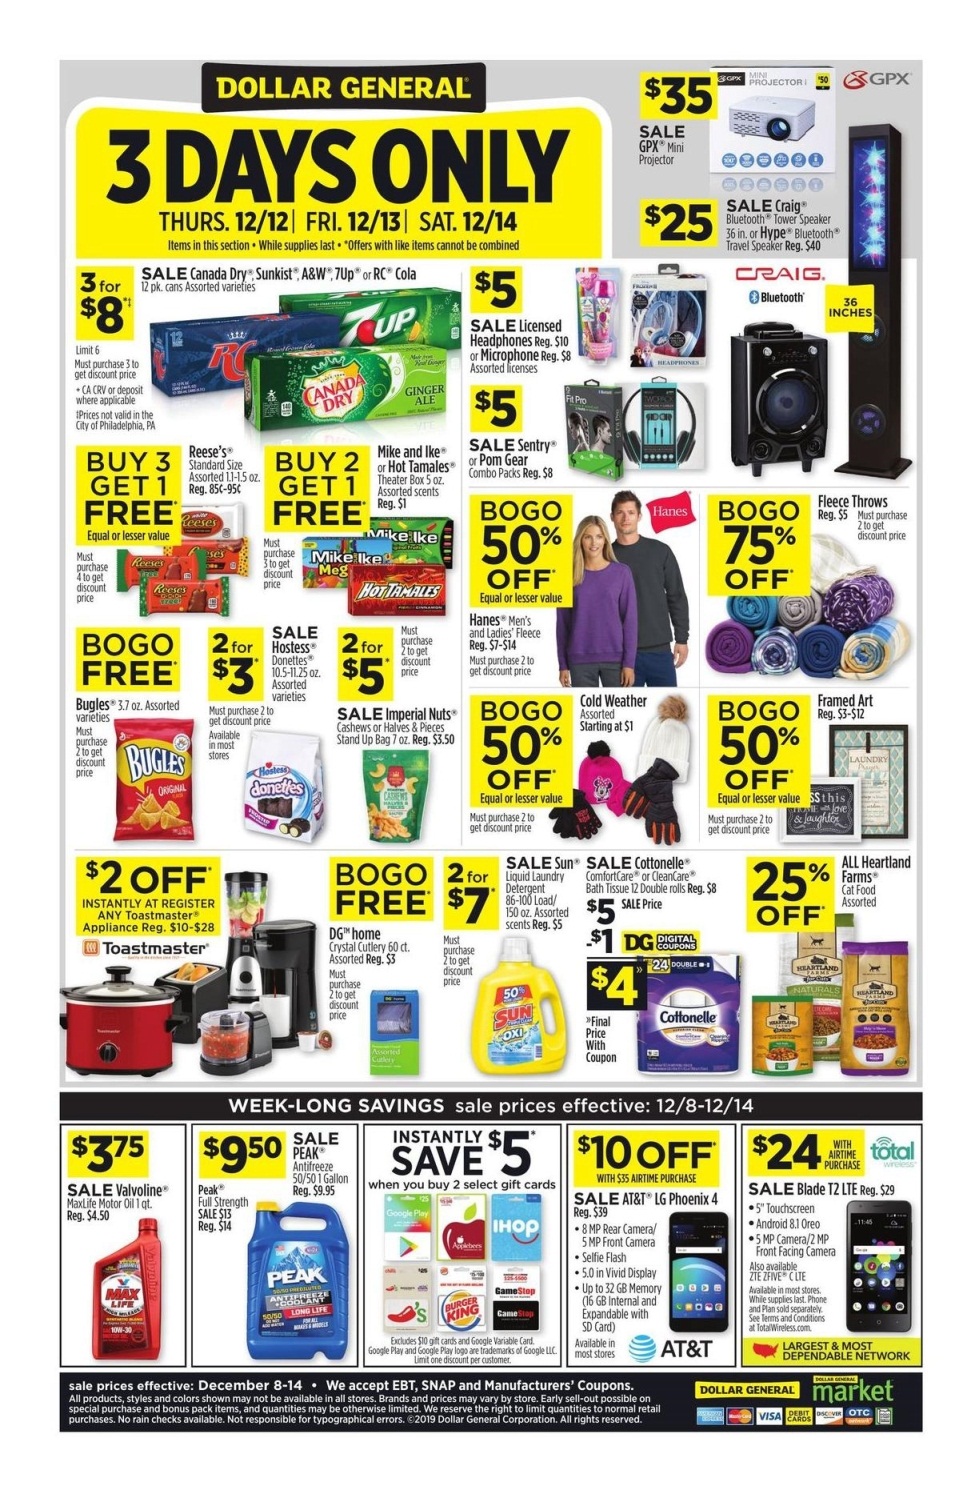 Dollar General Green Monday 2020 Ad, Deals and Sales